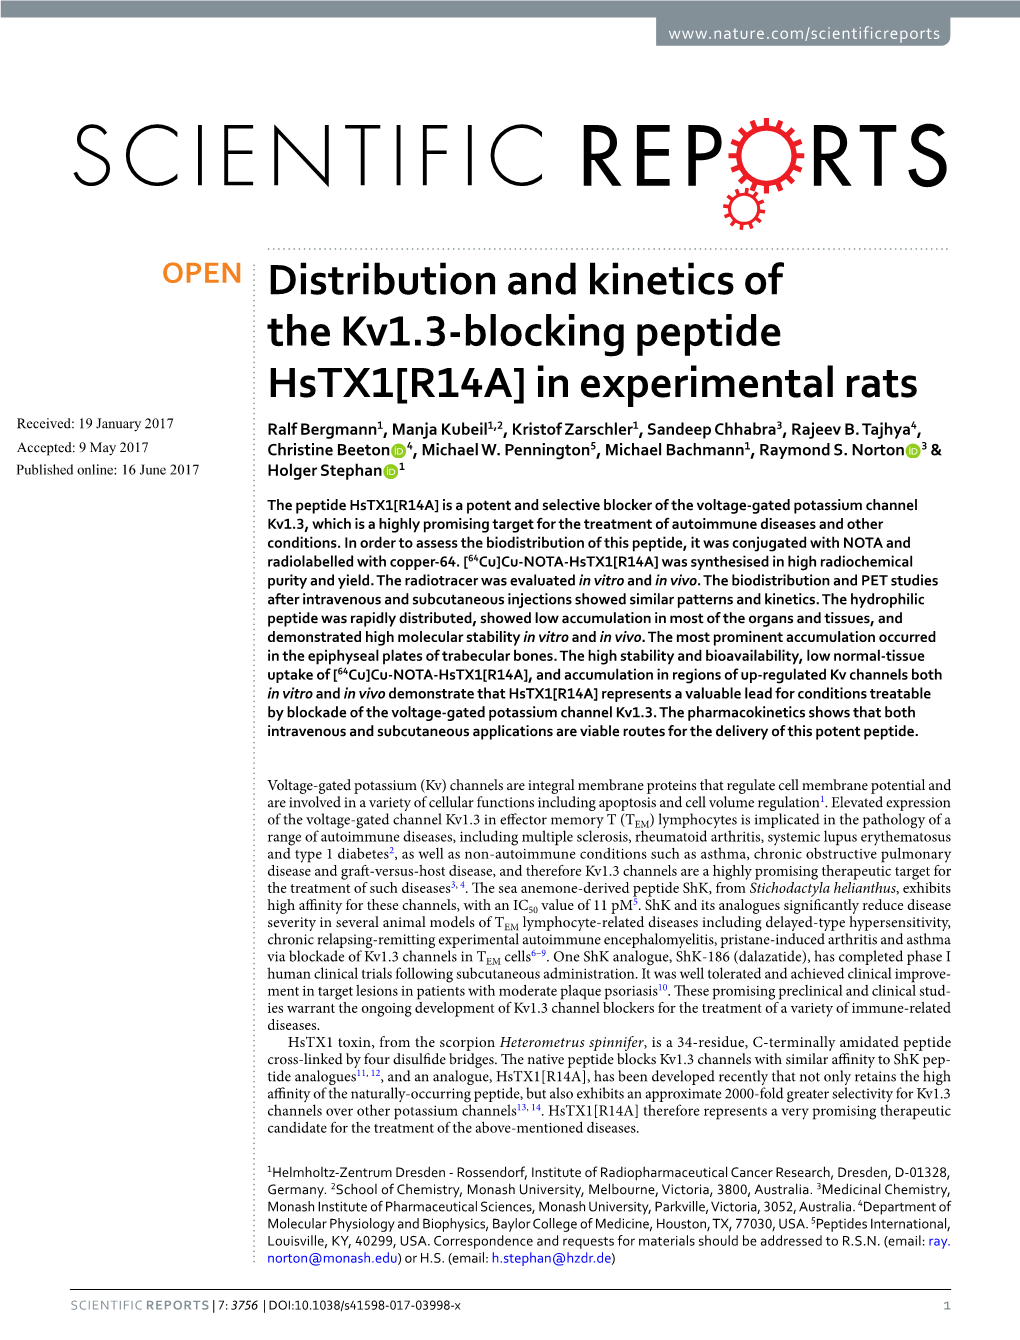 Distribution and Kinetics of the Kv1.3-Blocking Peptide Hstx1[R14A]